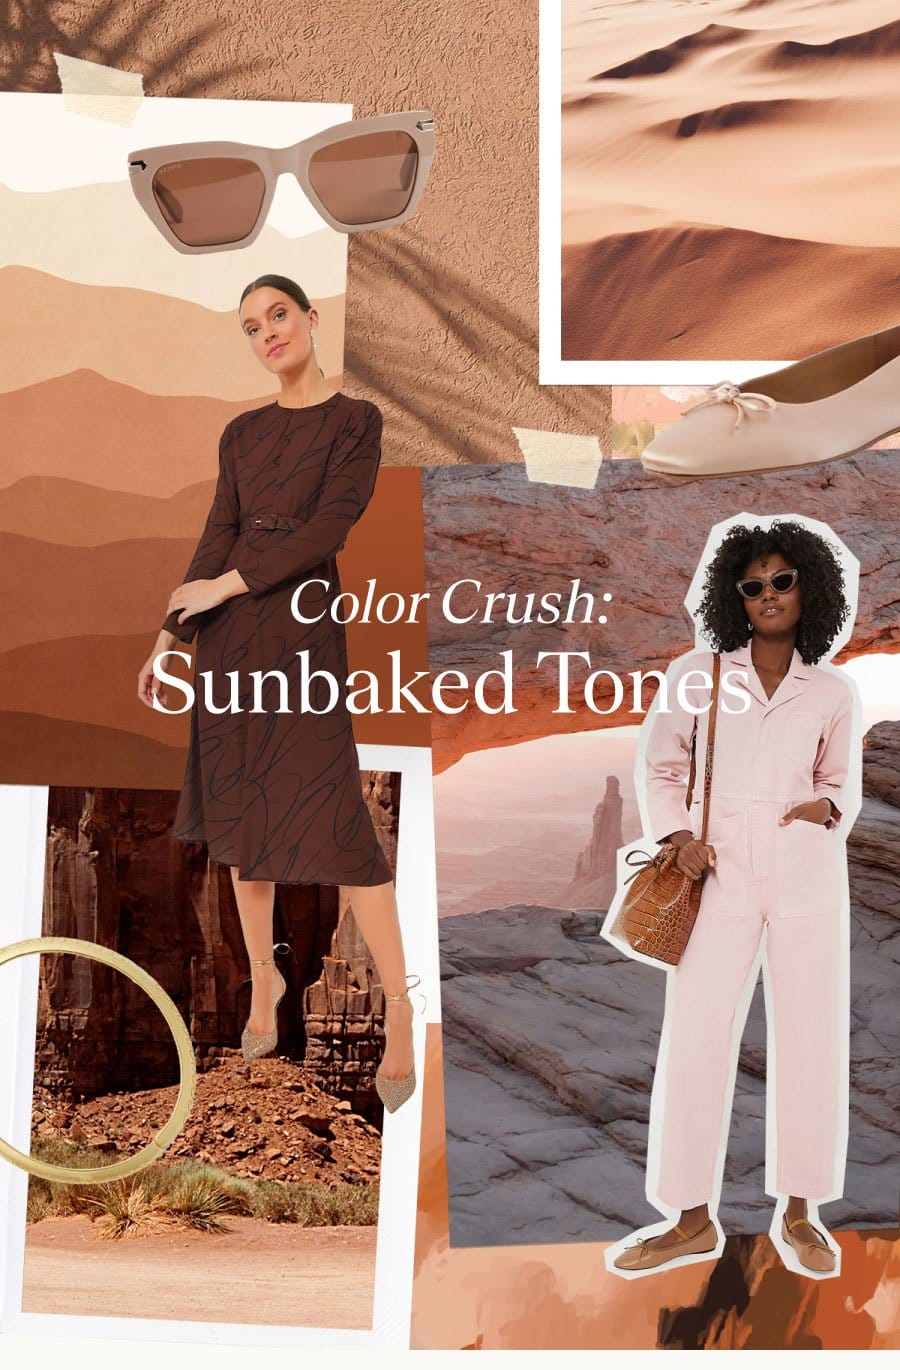 COLOR CRUSH SUNBAKED TONES